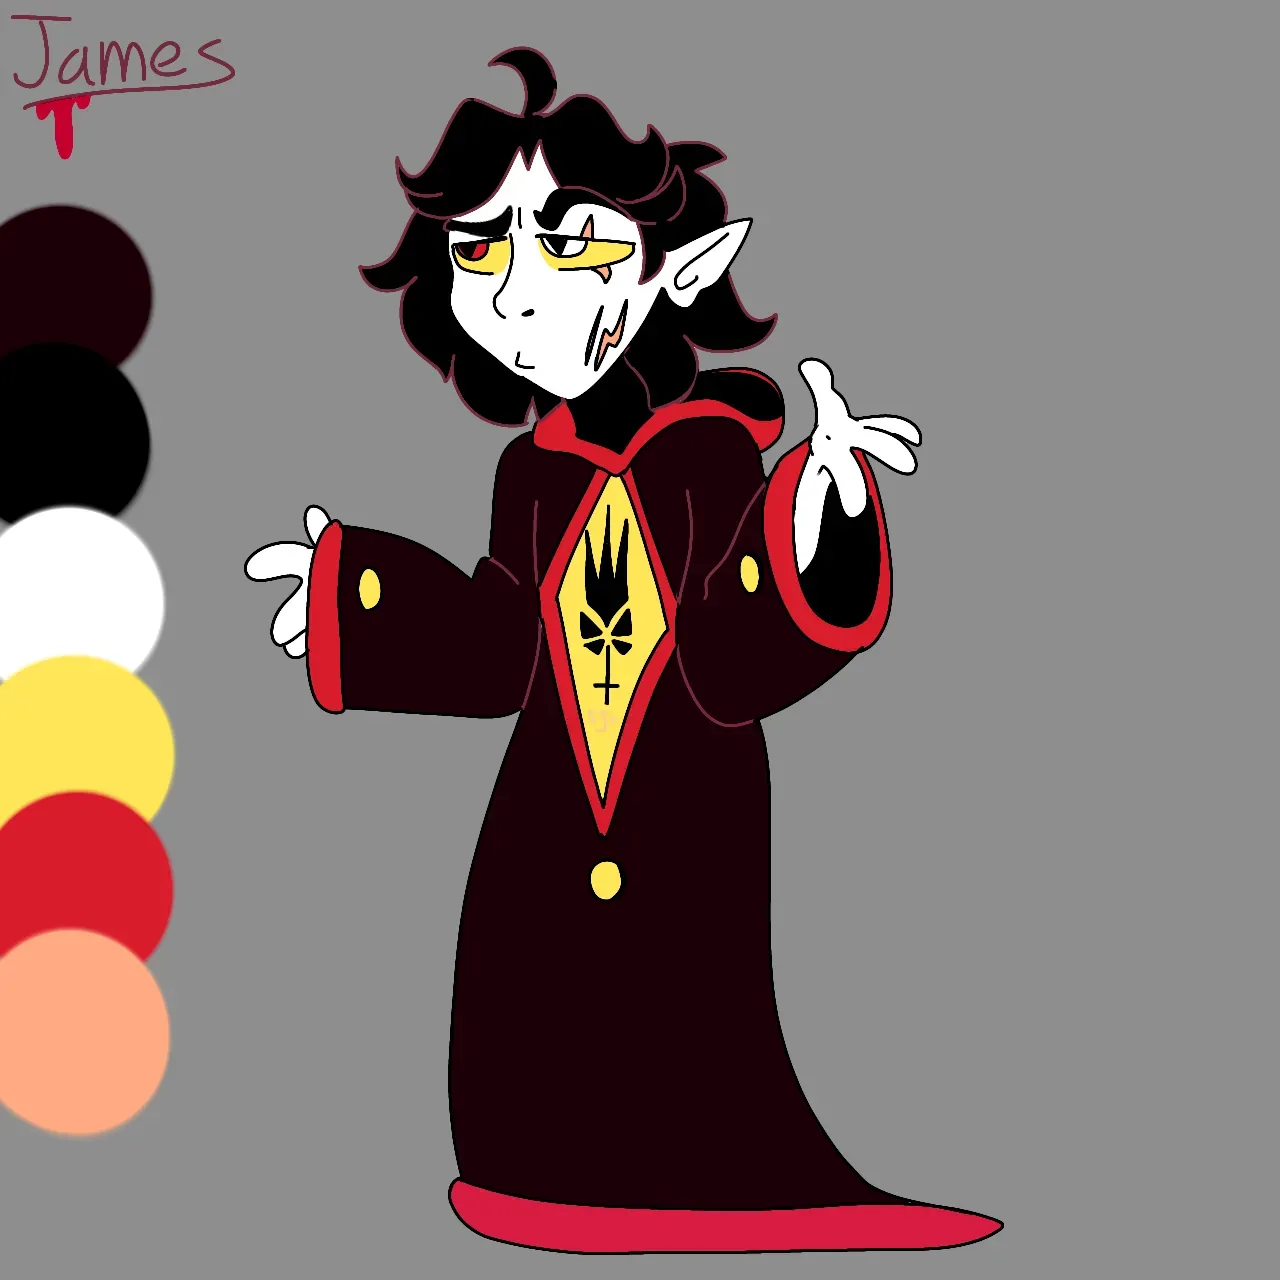 Avatar of James the Cultist